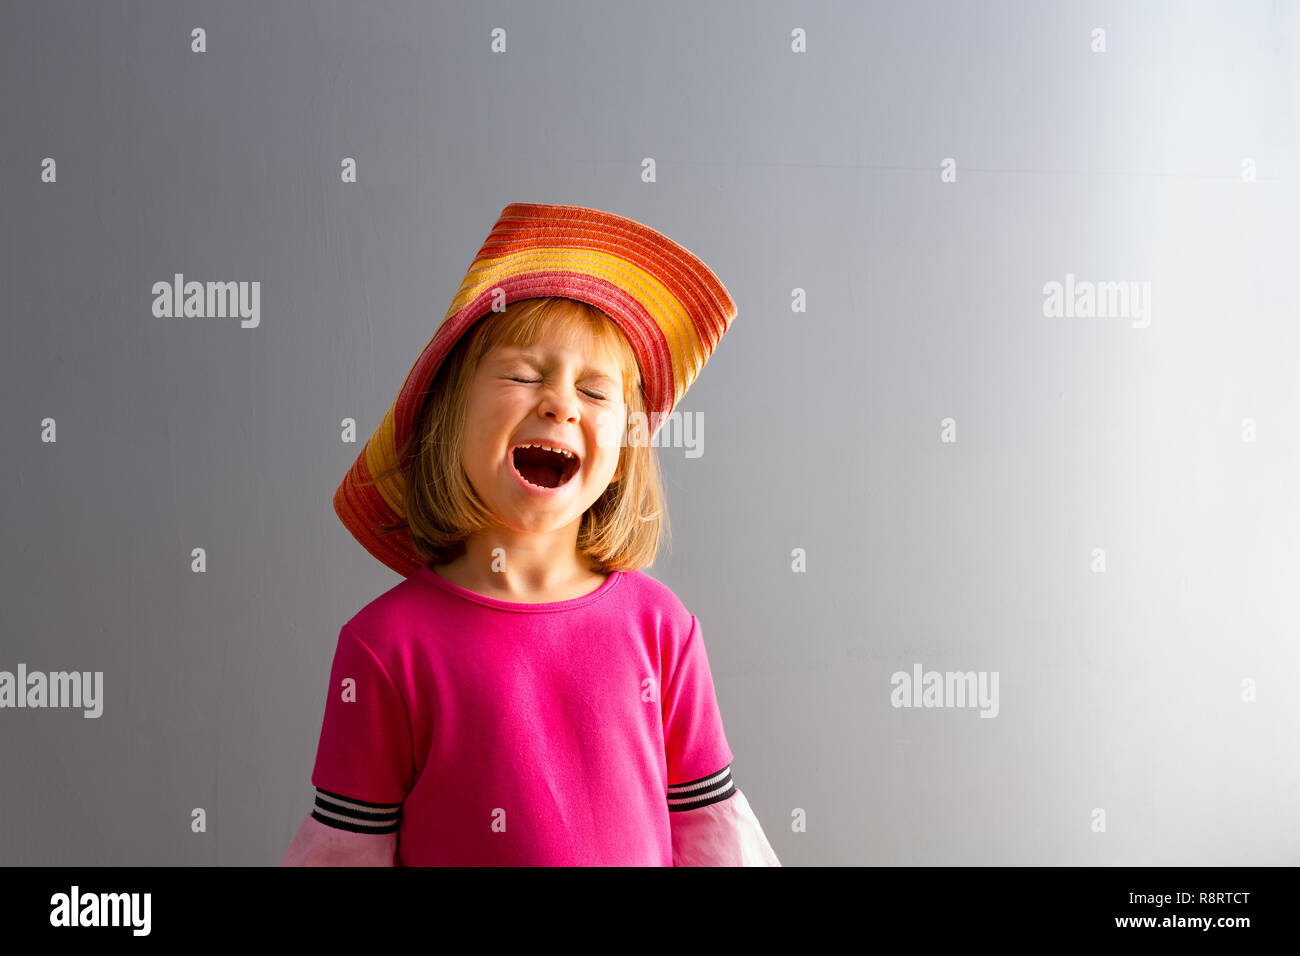 Young girl in pink dress and colorful straw hat screaming or singing with her mouth open wide, standing against grey wall background with copy space.  Stock Photo